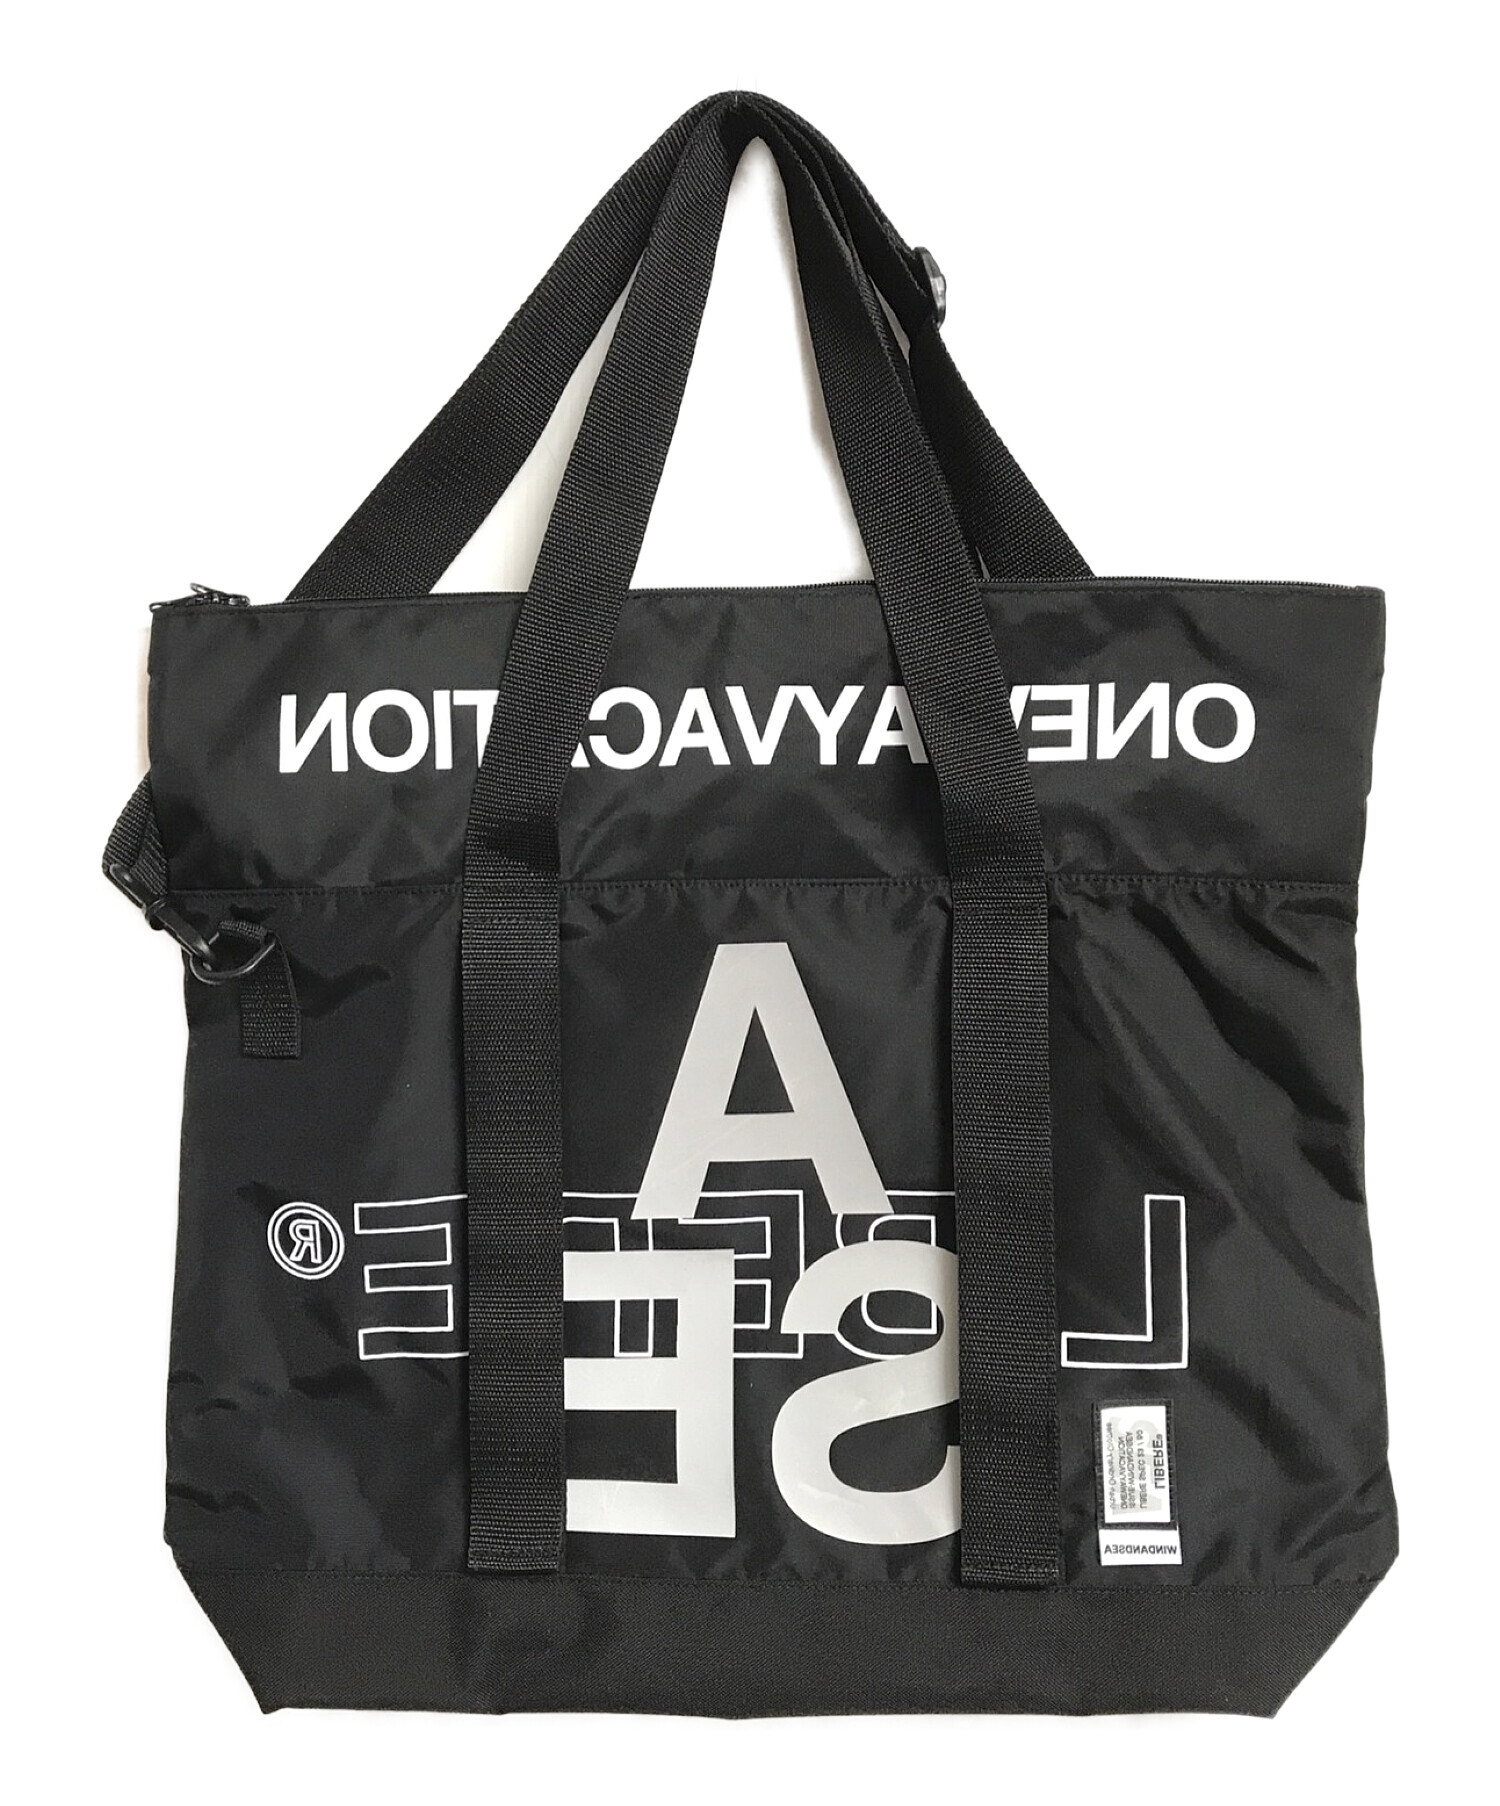 WIND AND SEA トートバッグ SEA TOTE BAG - トートバッグ